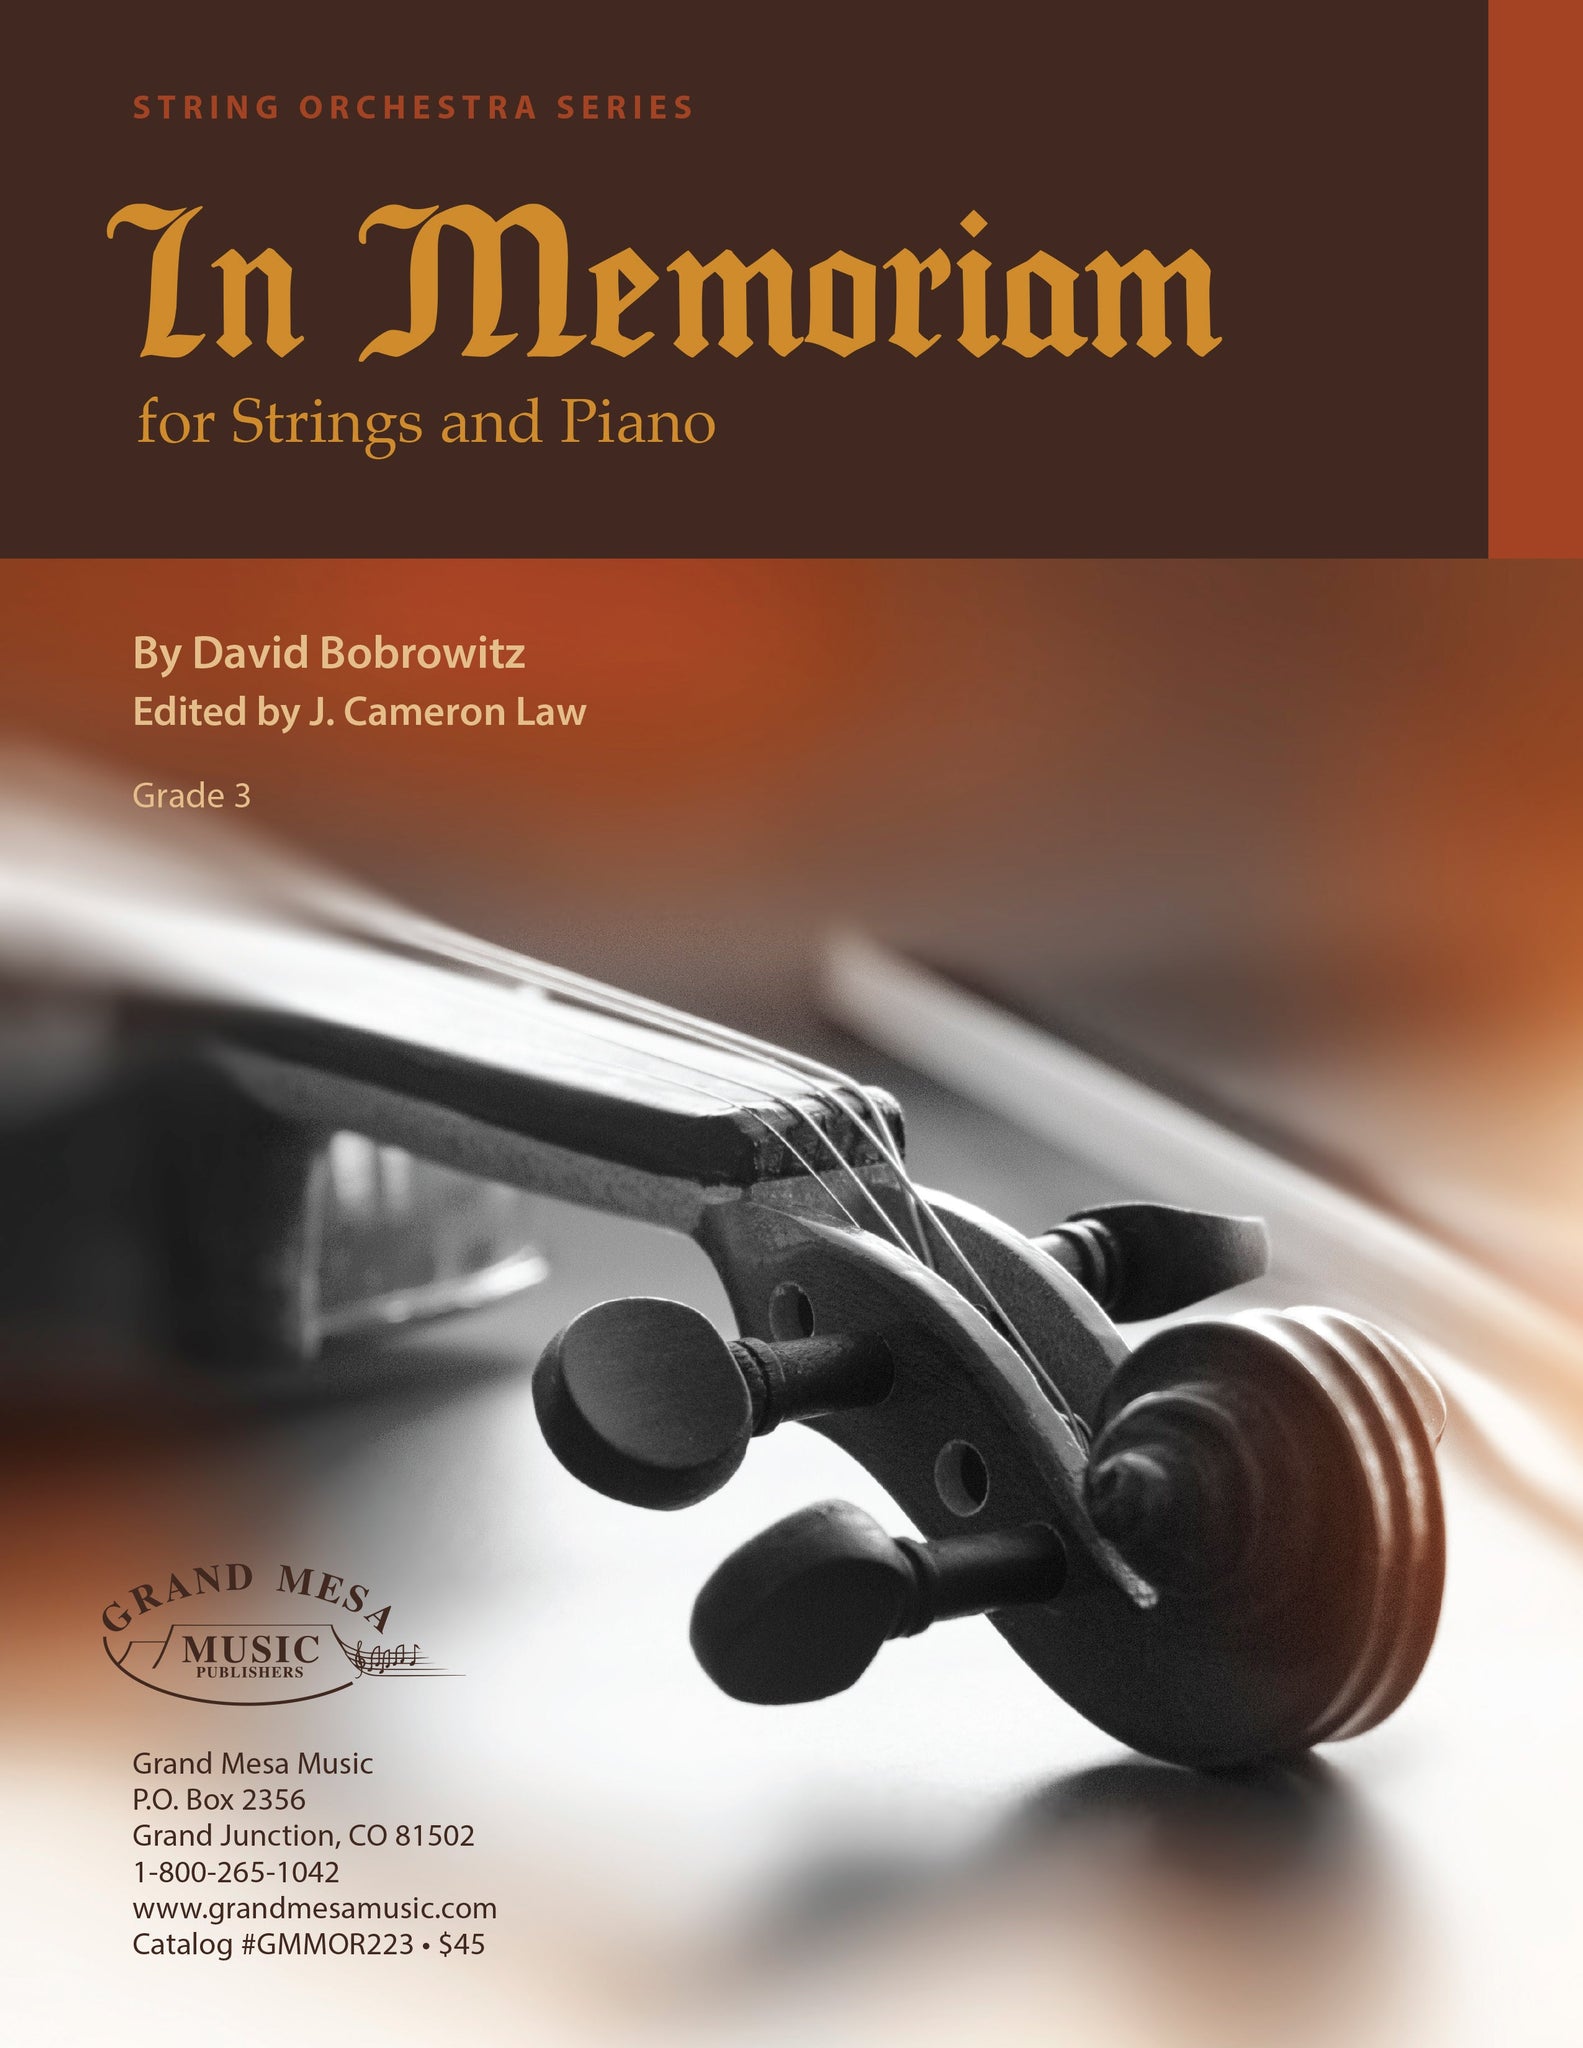 Strings sheet music cover of In Memoriam, composed by David Bobrowitz.